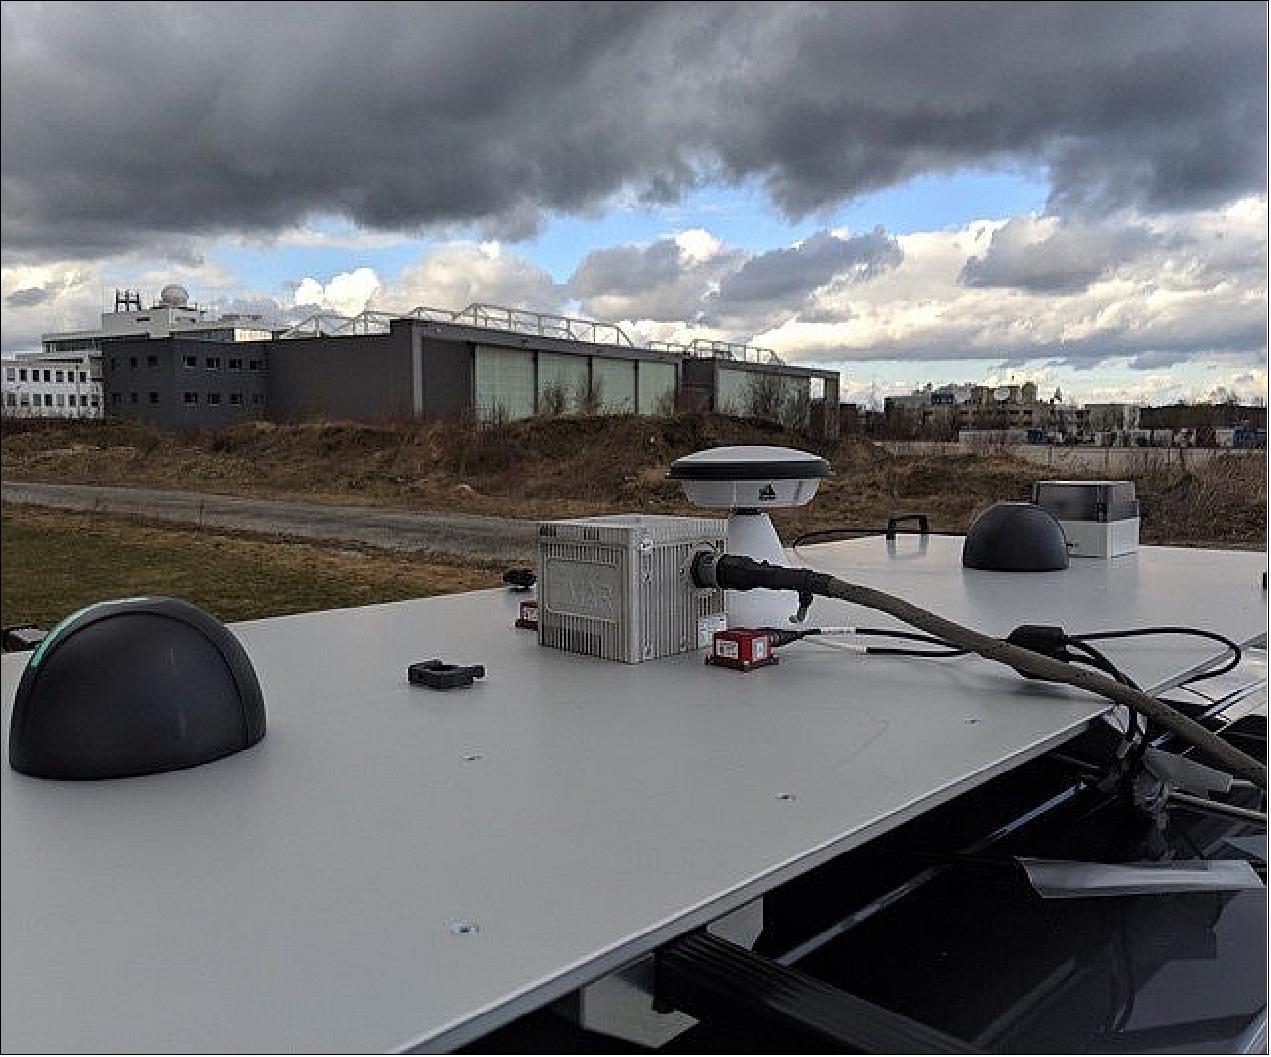 Figure 7: Antennas on vehicle roof. Close-up view of Car A with GNSS and LTE (Long-Term Evolution) antennas (image credit: DLR/GMV)